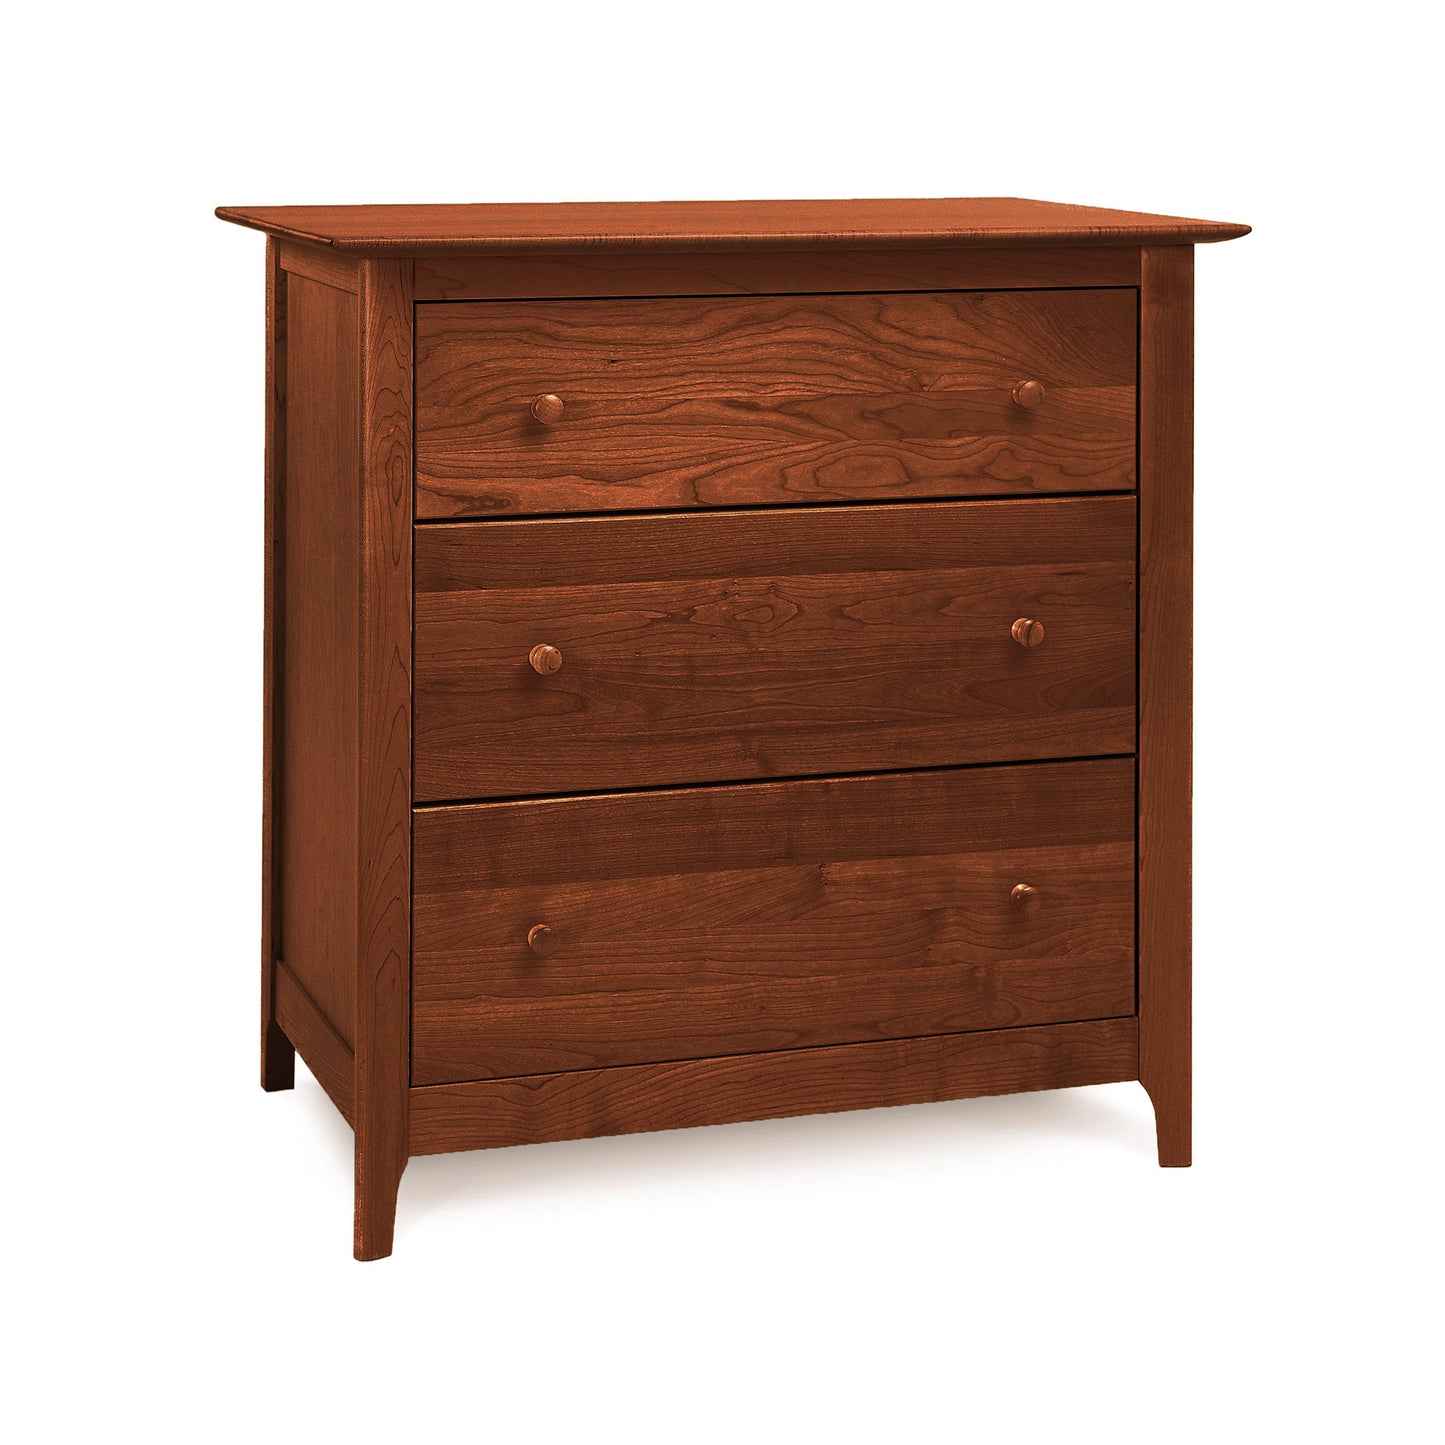 A handmade Sarah 3-Drawer Chest of natural cherry wood, designed by Copeland Furniture, stands against a plain white background.